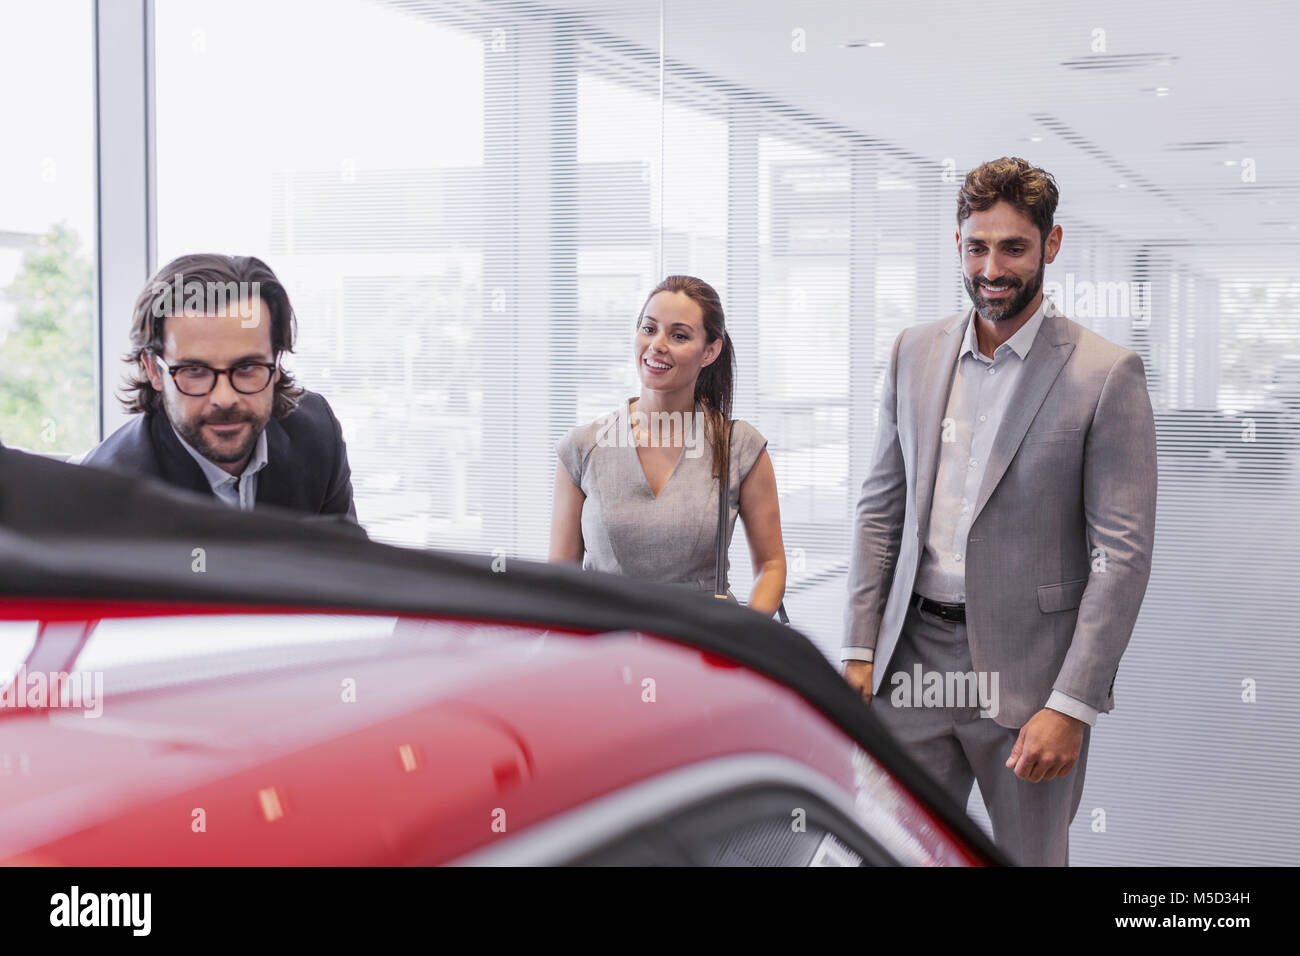 Car salesman showing new car to couple customers in car dealership showroom Stock Photo